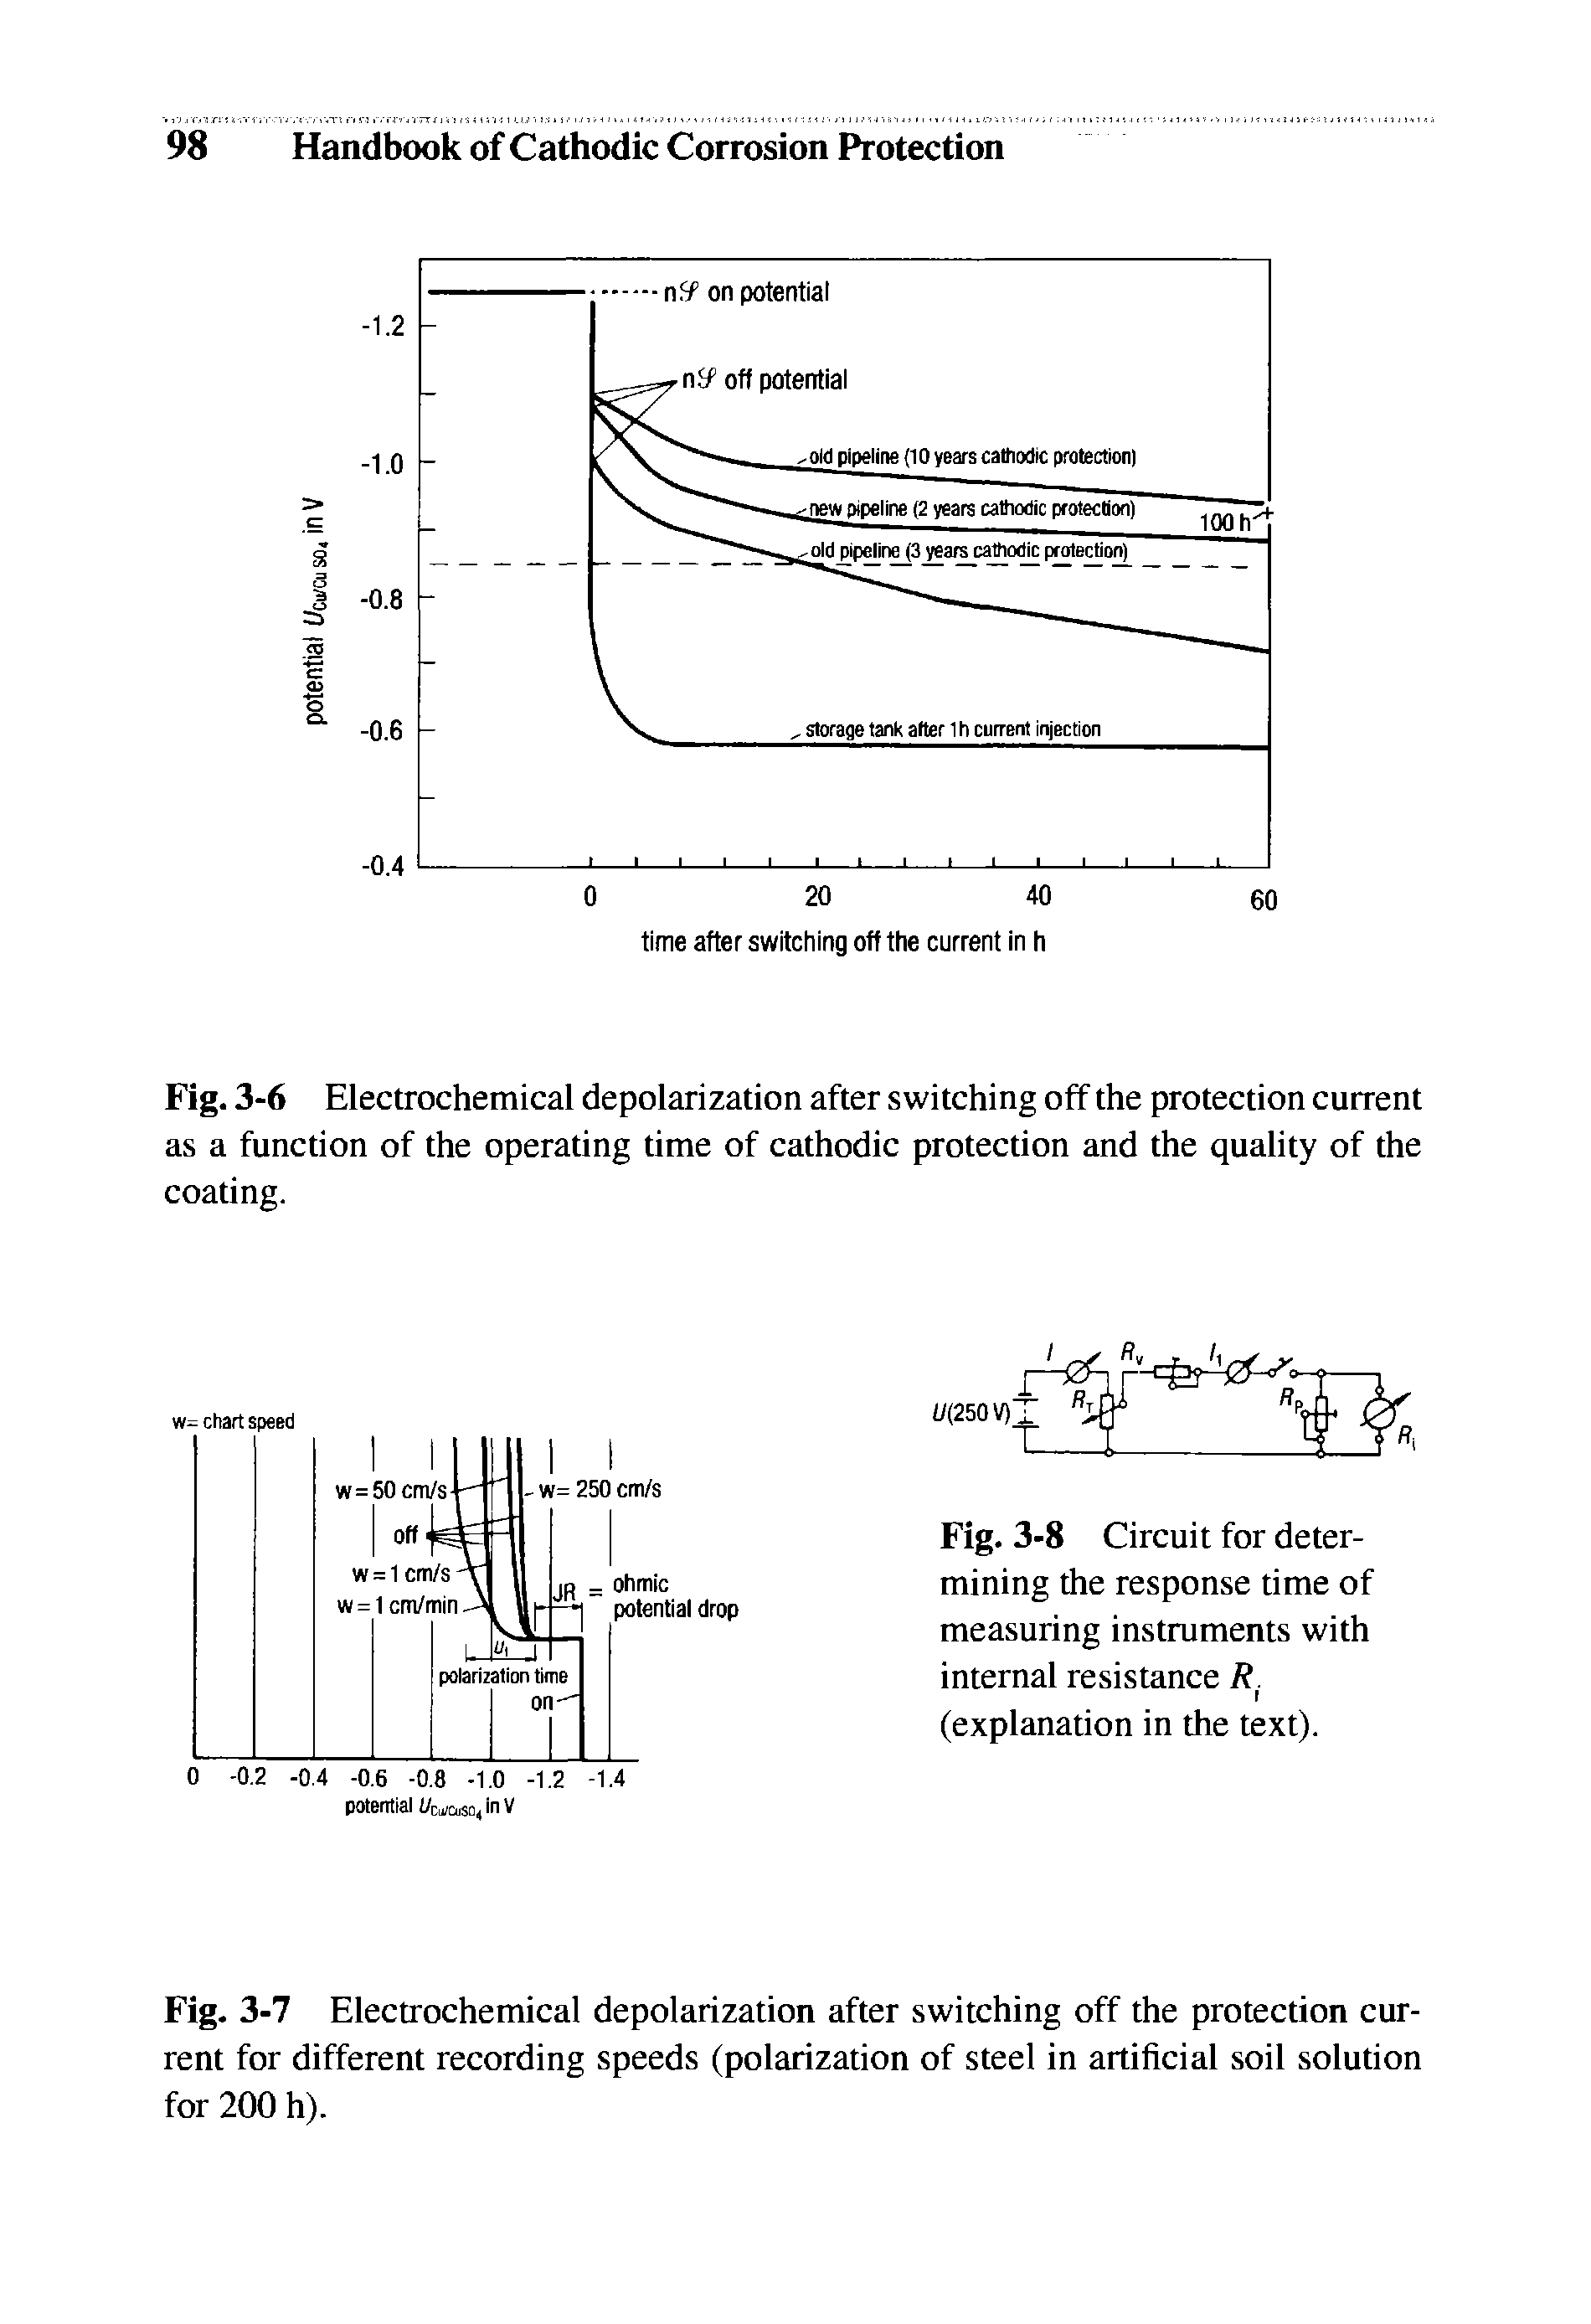 Fig. 3-6 Electrochemical depolarization after switching off the protection current as a function of the operating time of cathodic protection and the quality of the coating.